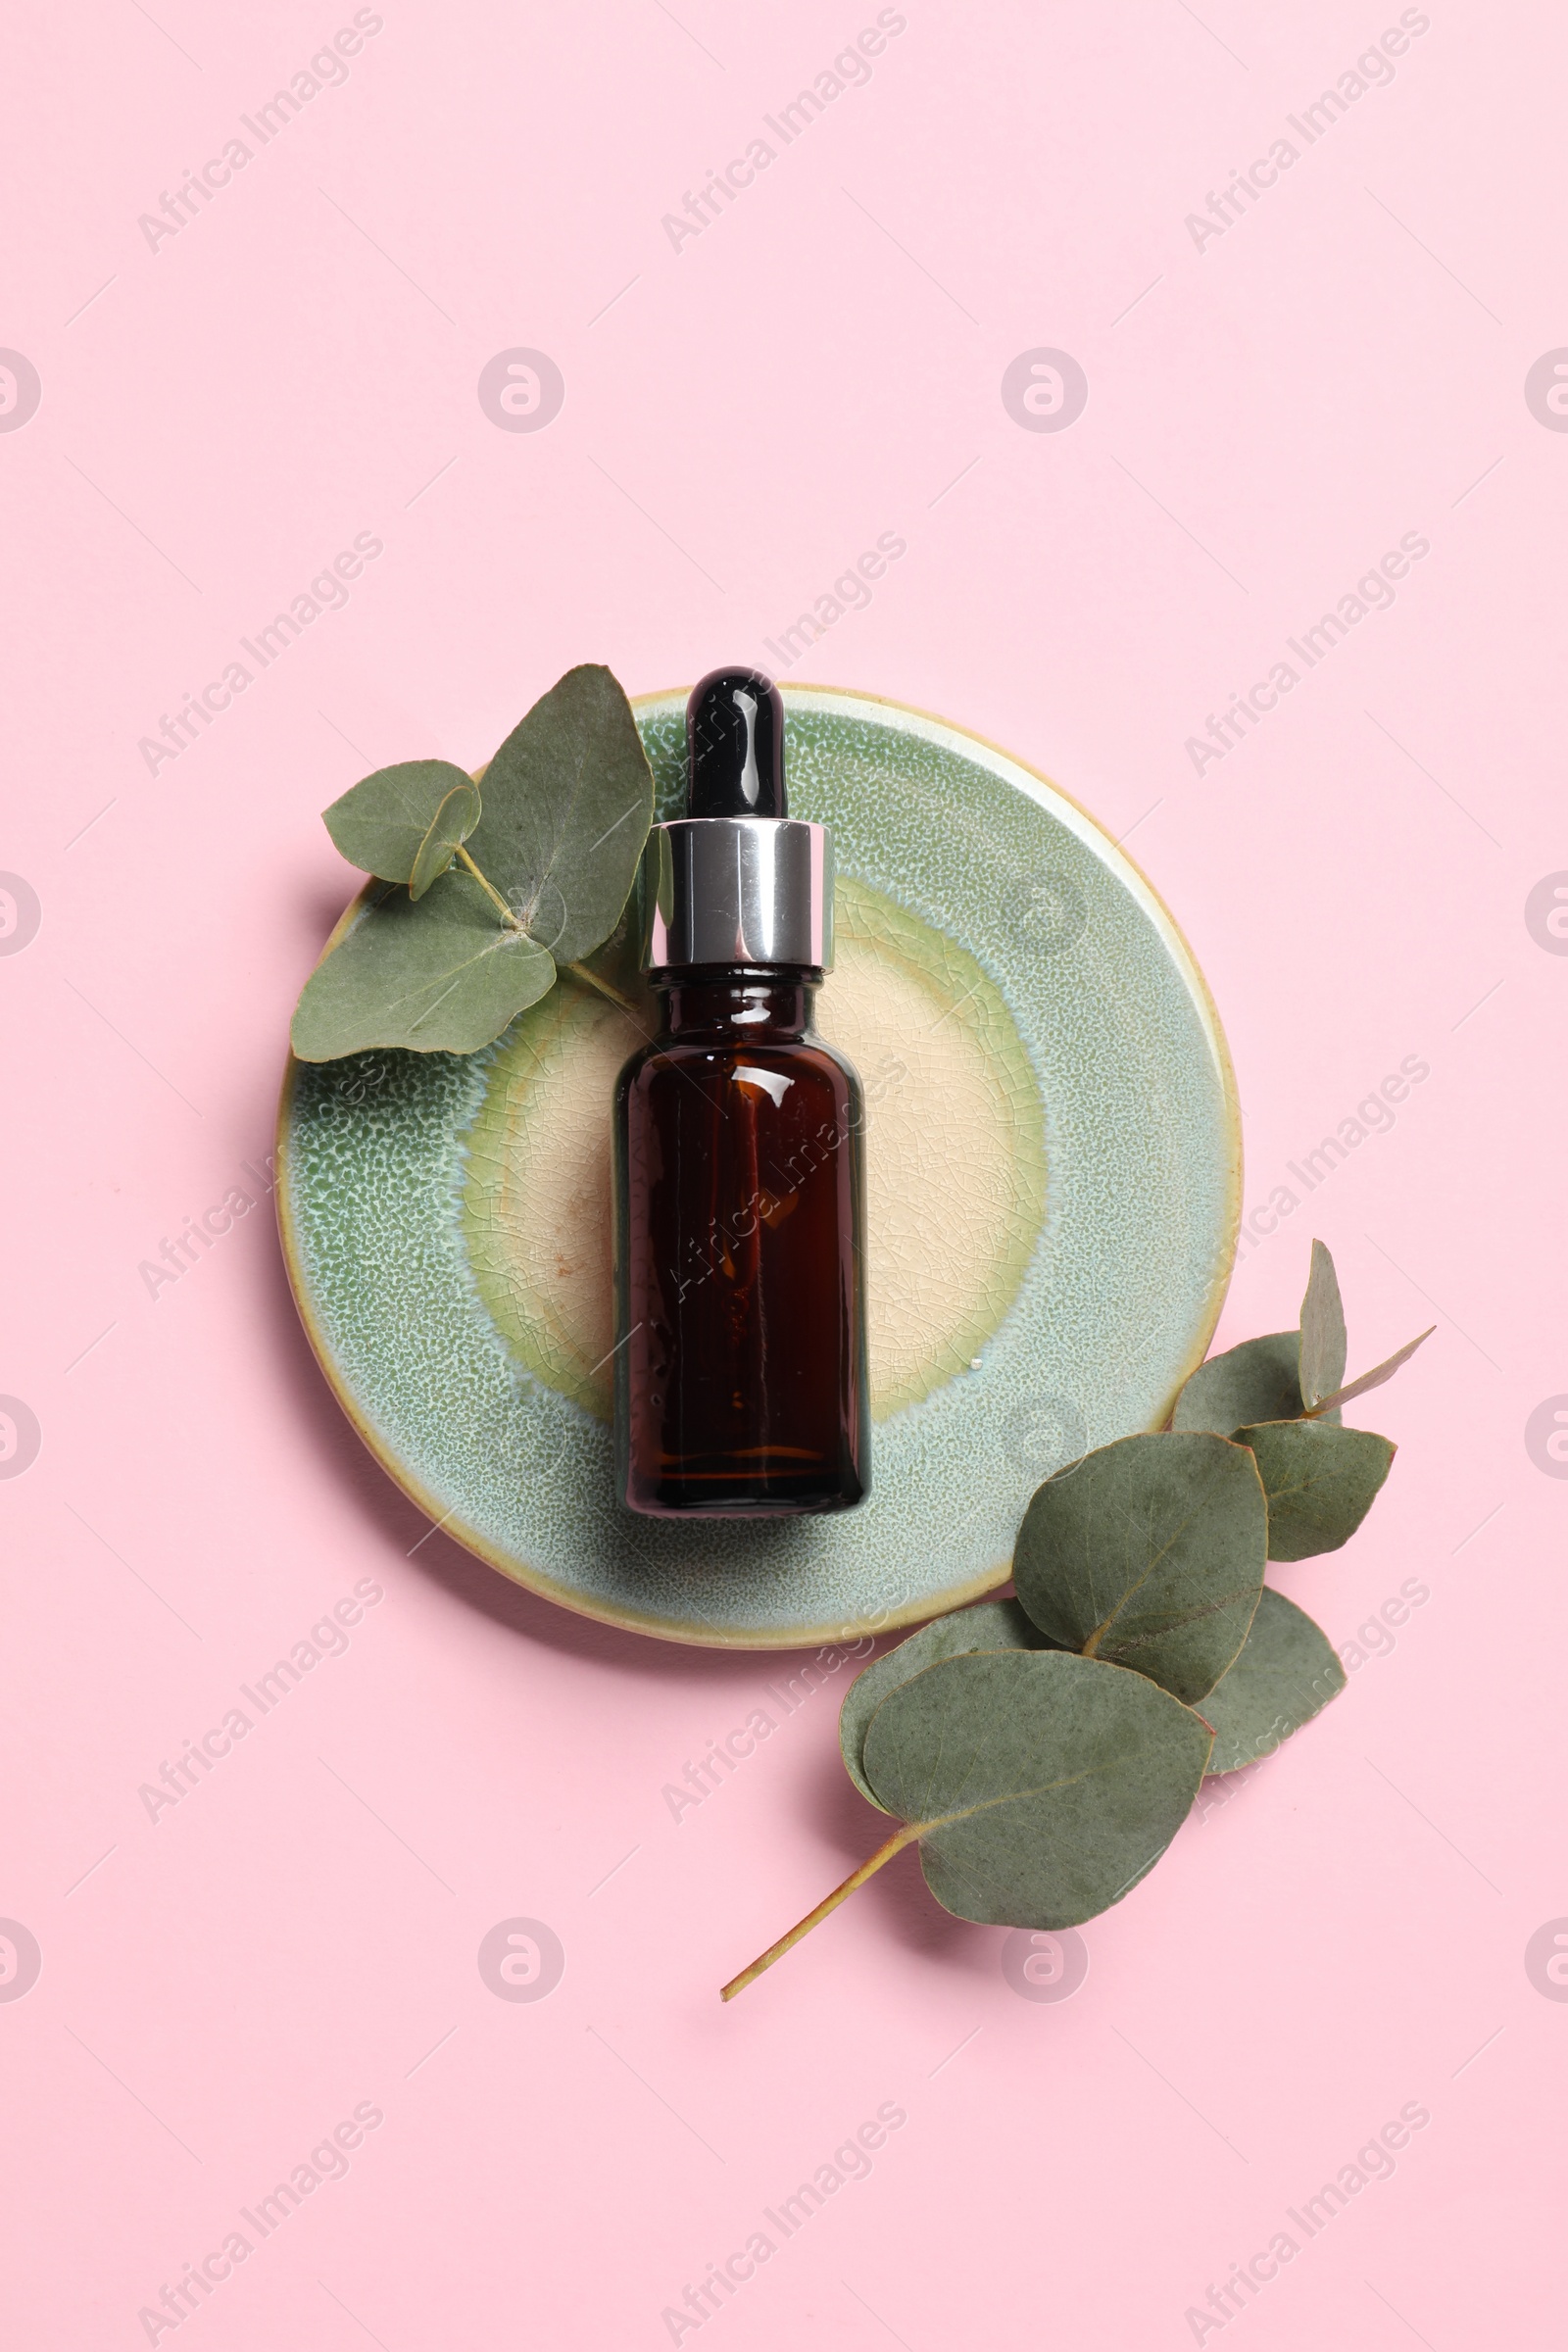 Photo of Aromatherapy product. Bottle of essential oil and eucalyptus leaves on pink background, top view